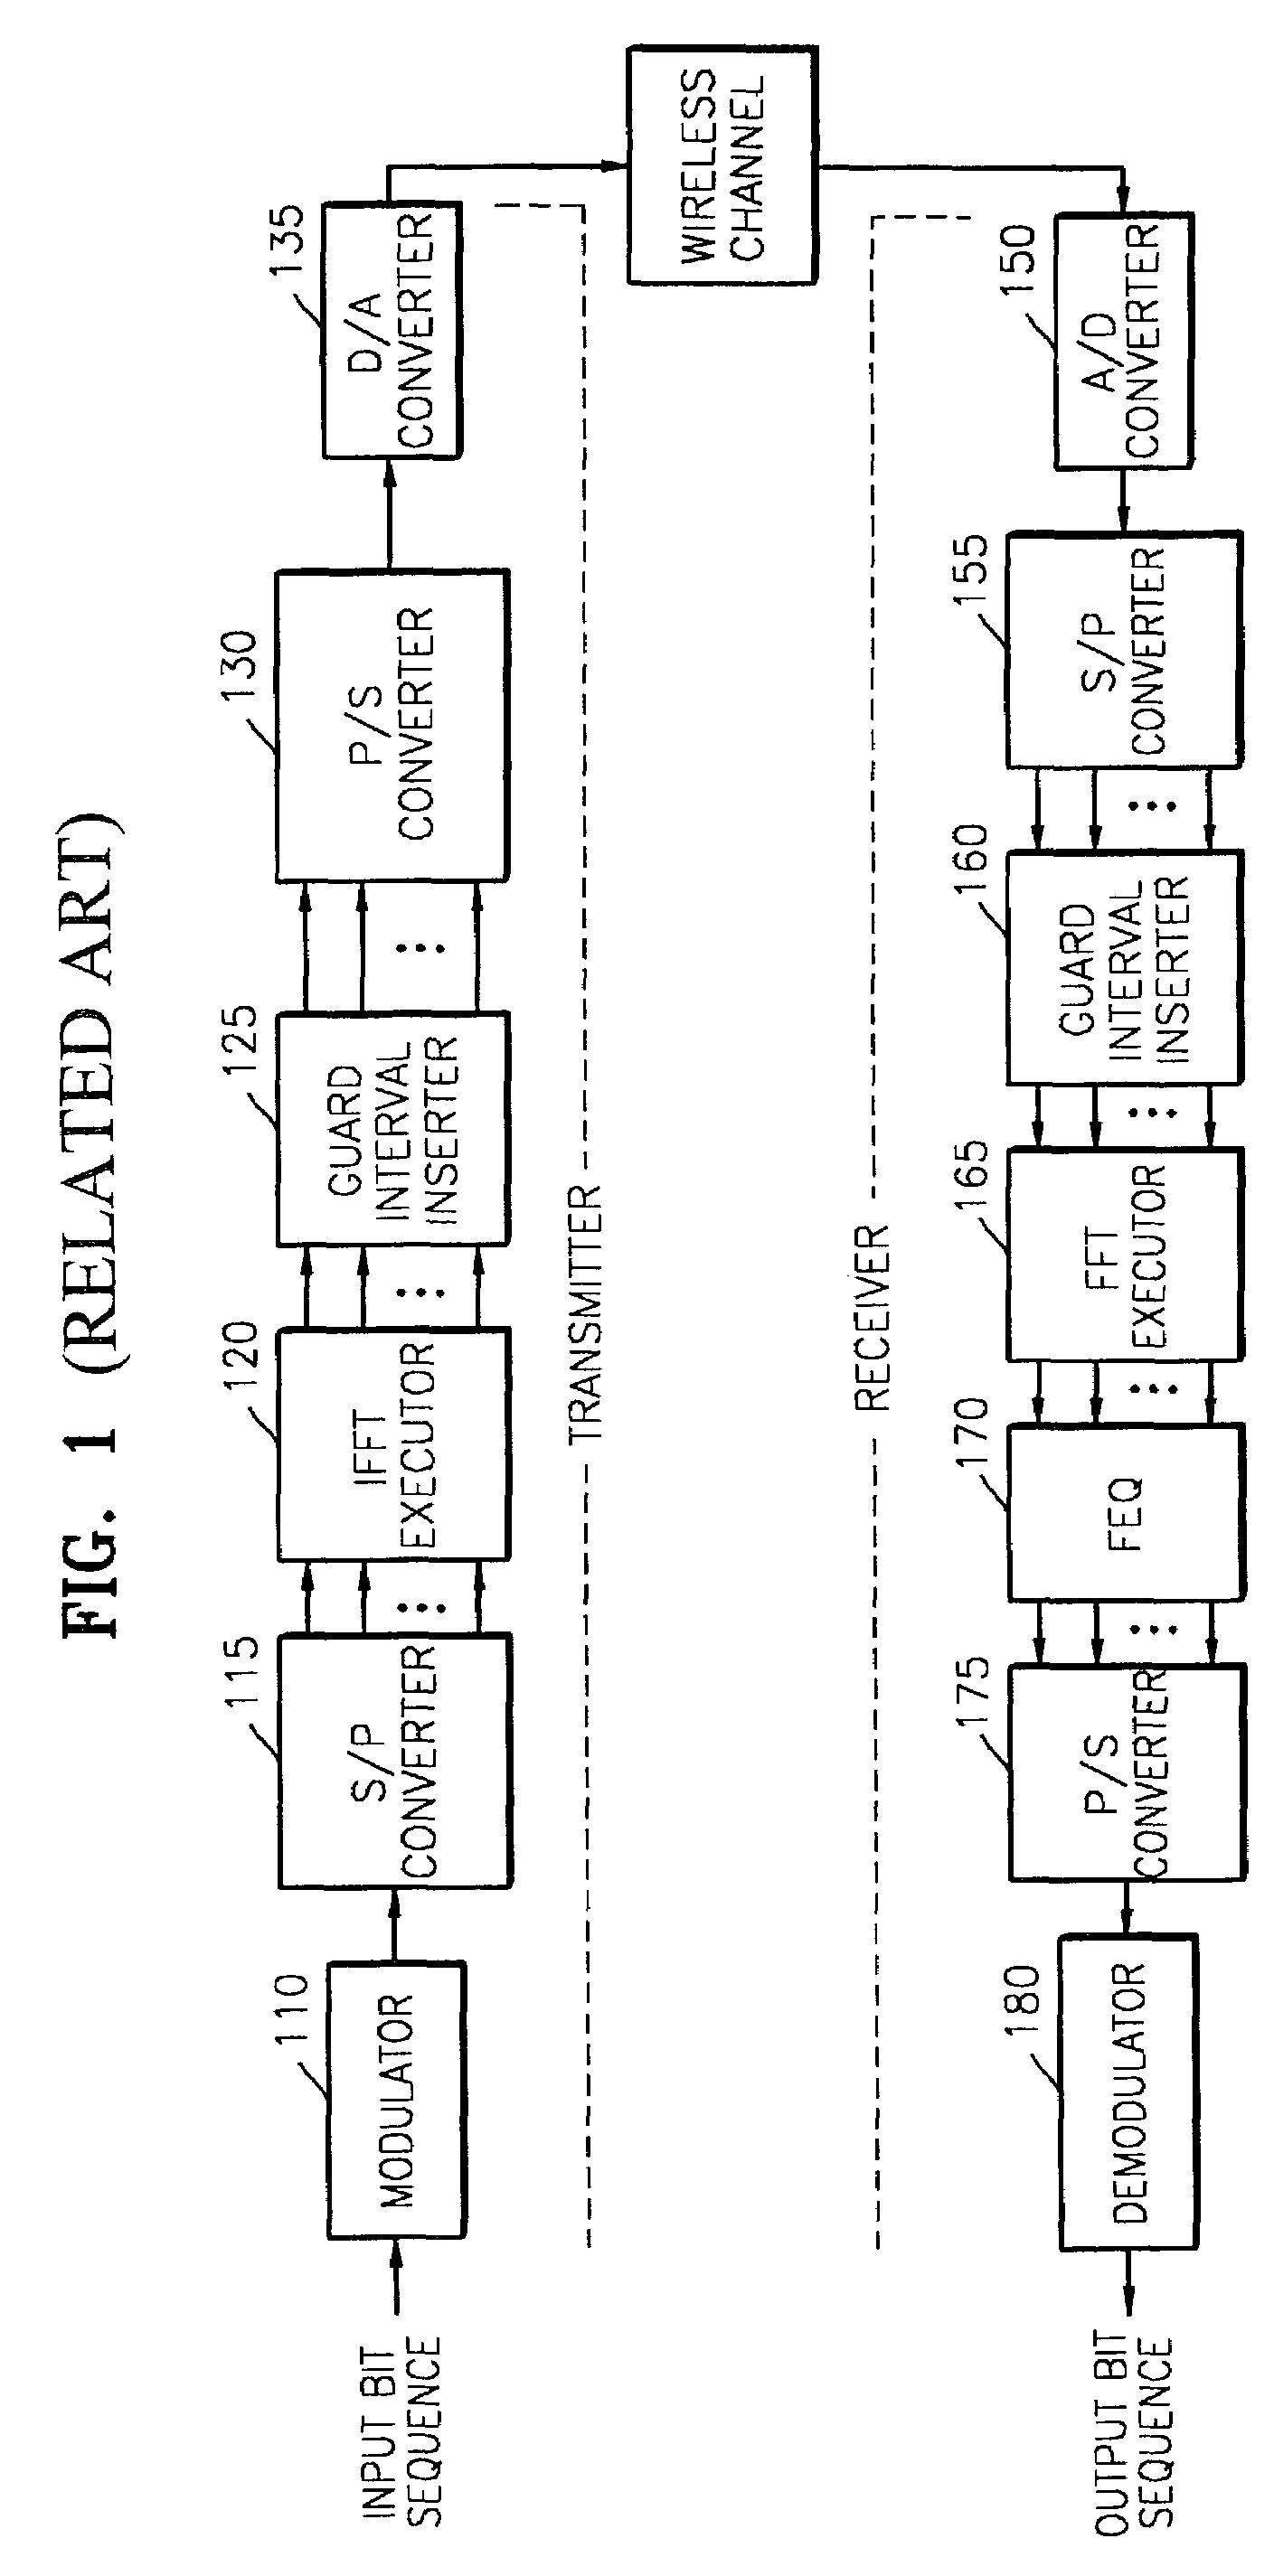 Preamble design for frequency offset estimation and channel equalization in burst OFDM transmission system